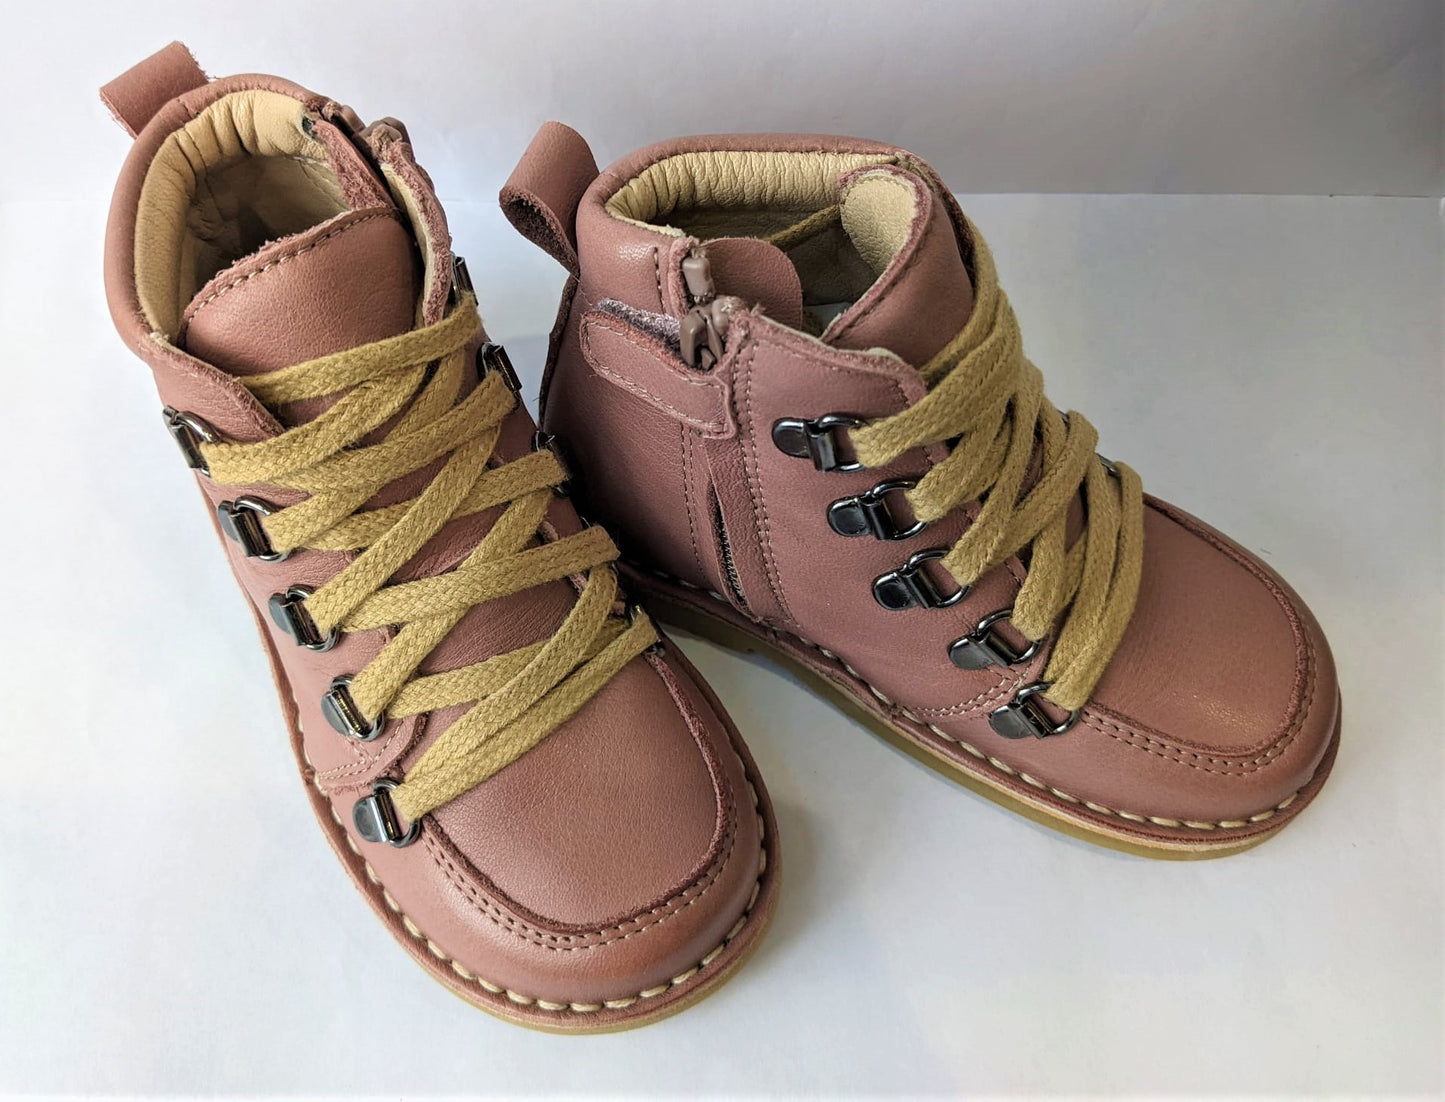 A girls lace up  boot by Petasil, style Kent, in pink leather with lace and zip fastening. Top view showing a pair.